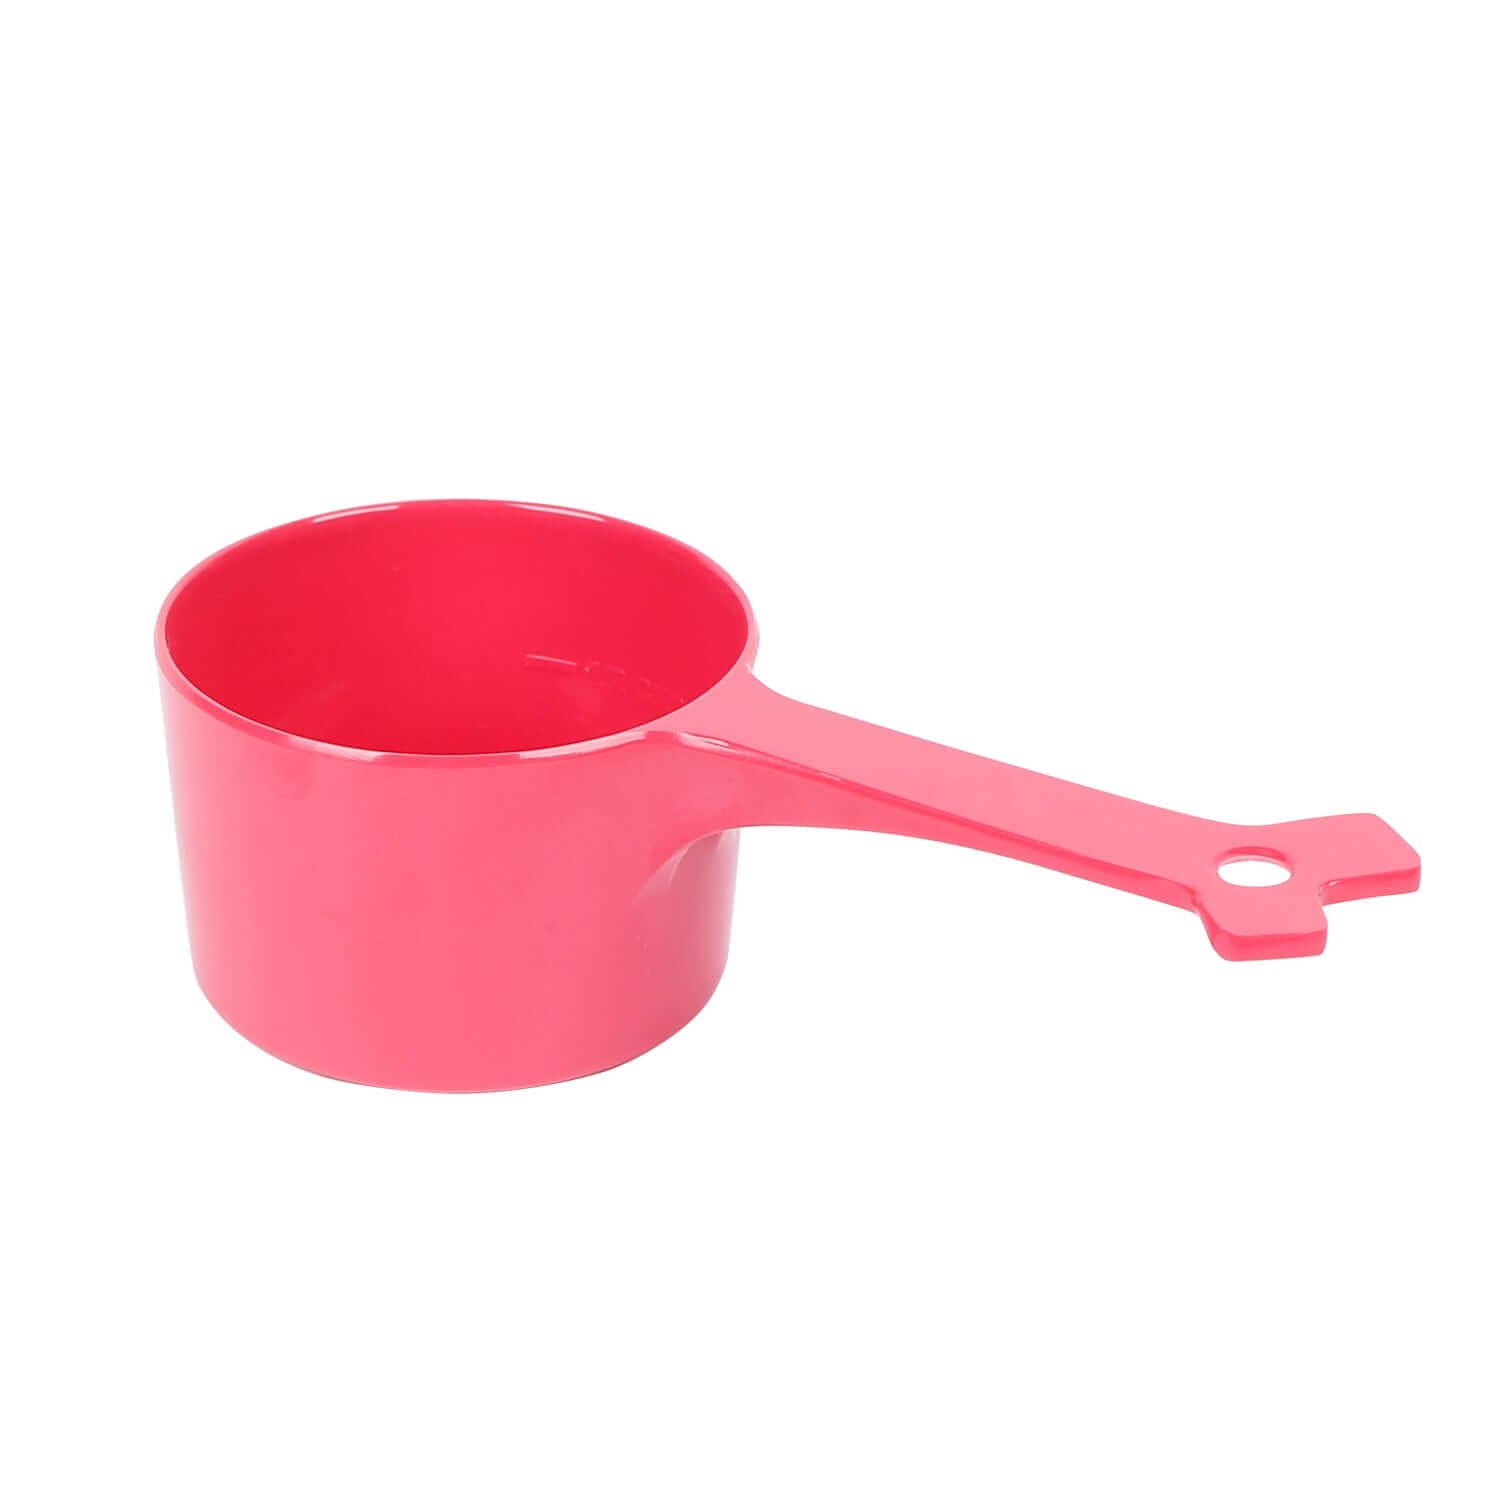 Watermelon (red) colour 1 cup dog food scoop.  1/2 cup fill line.  